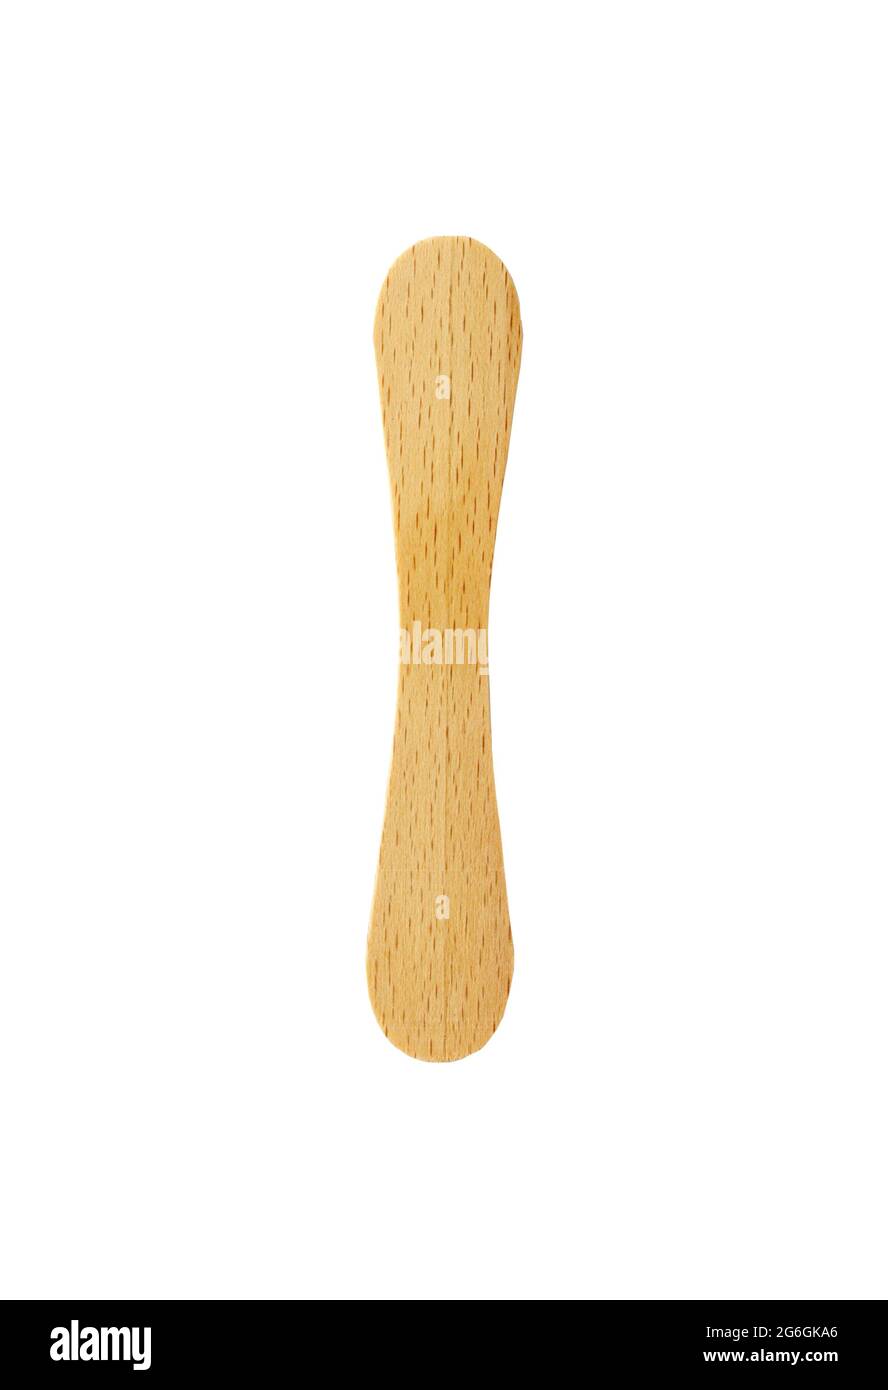 Wooden Ice cream stick isolated on white background. Ecological material. Eco friendly food accesories isolated on white background. Ice lolly stick. Stock Photo